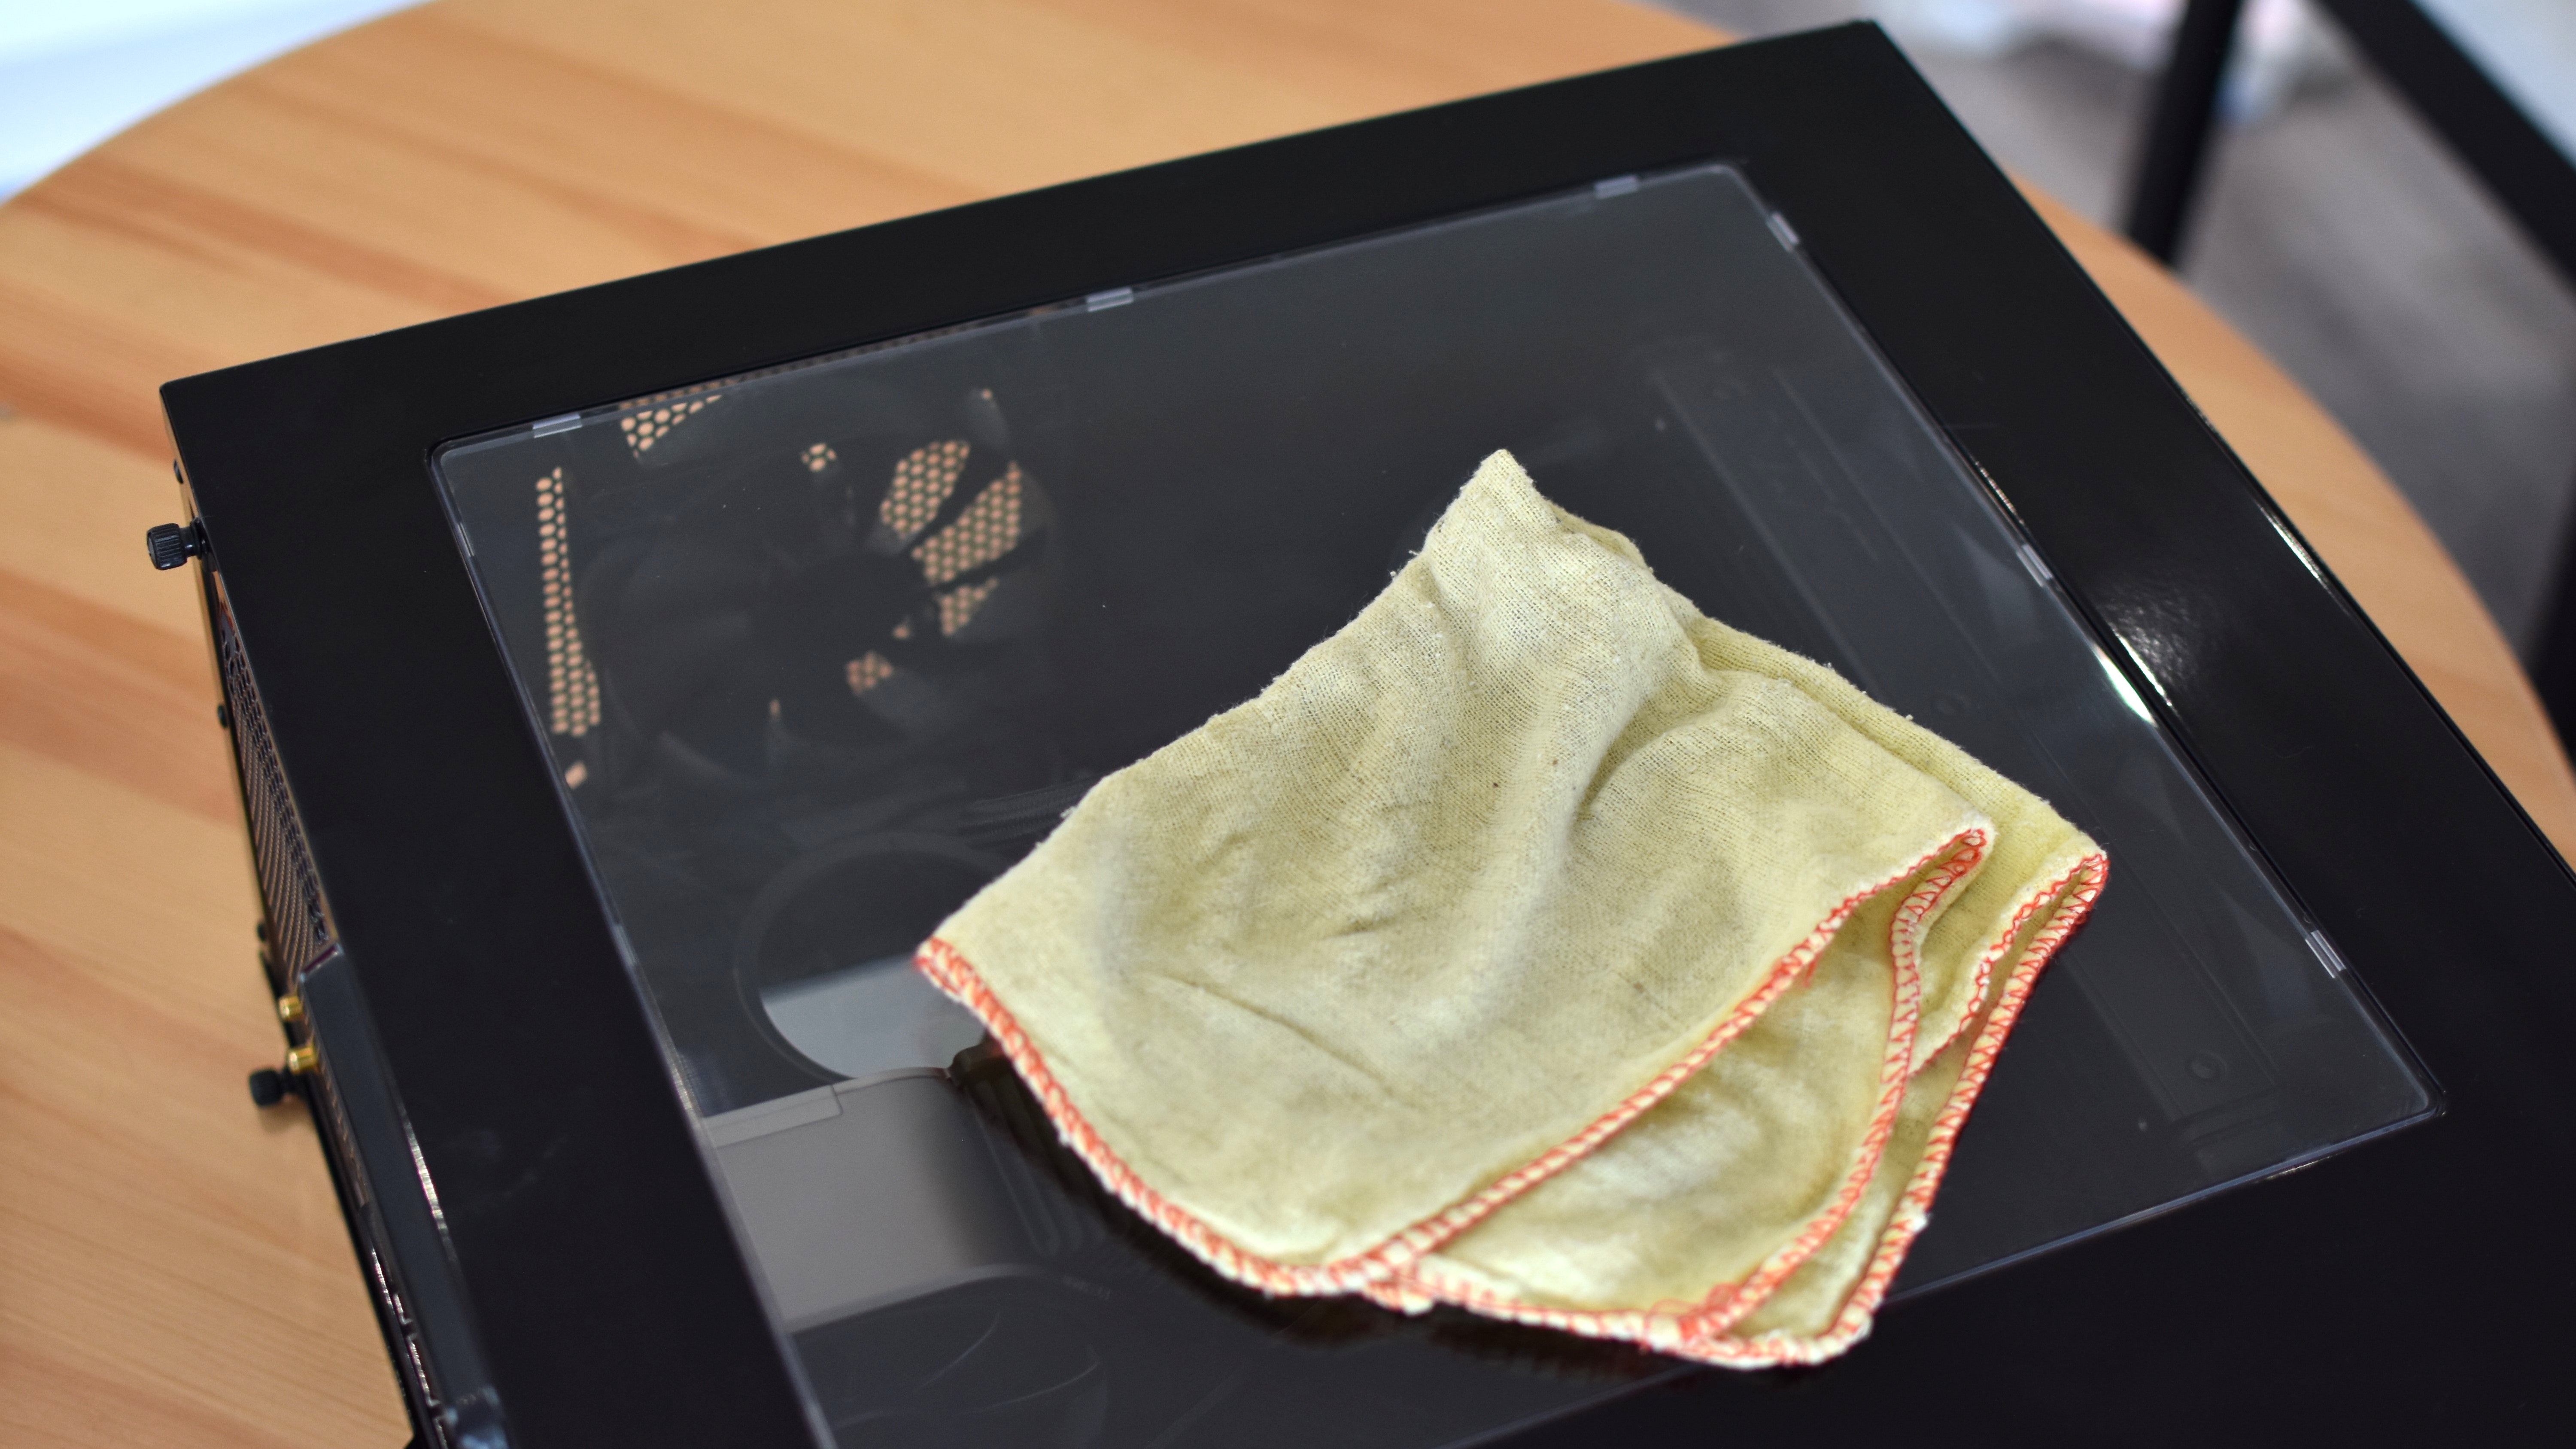 An image of a PC with a cleaning cloth on top of it.